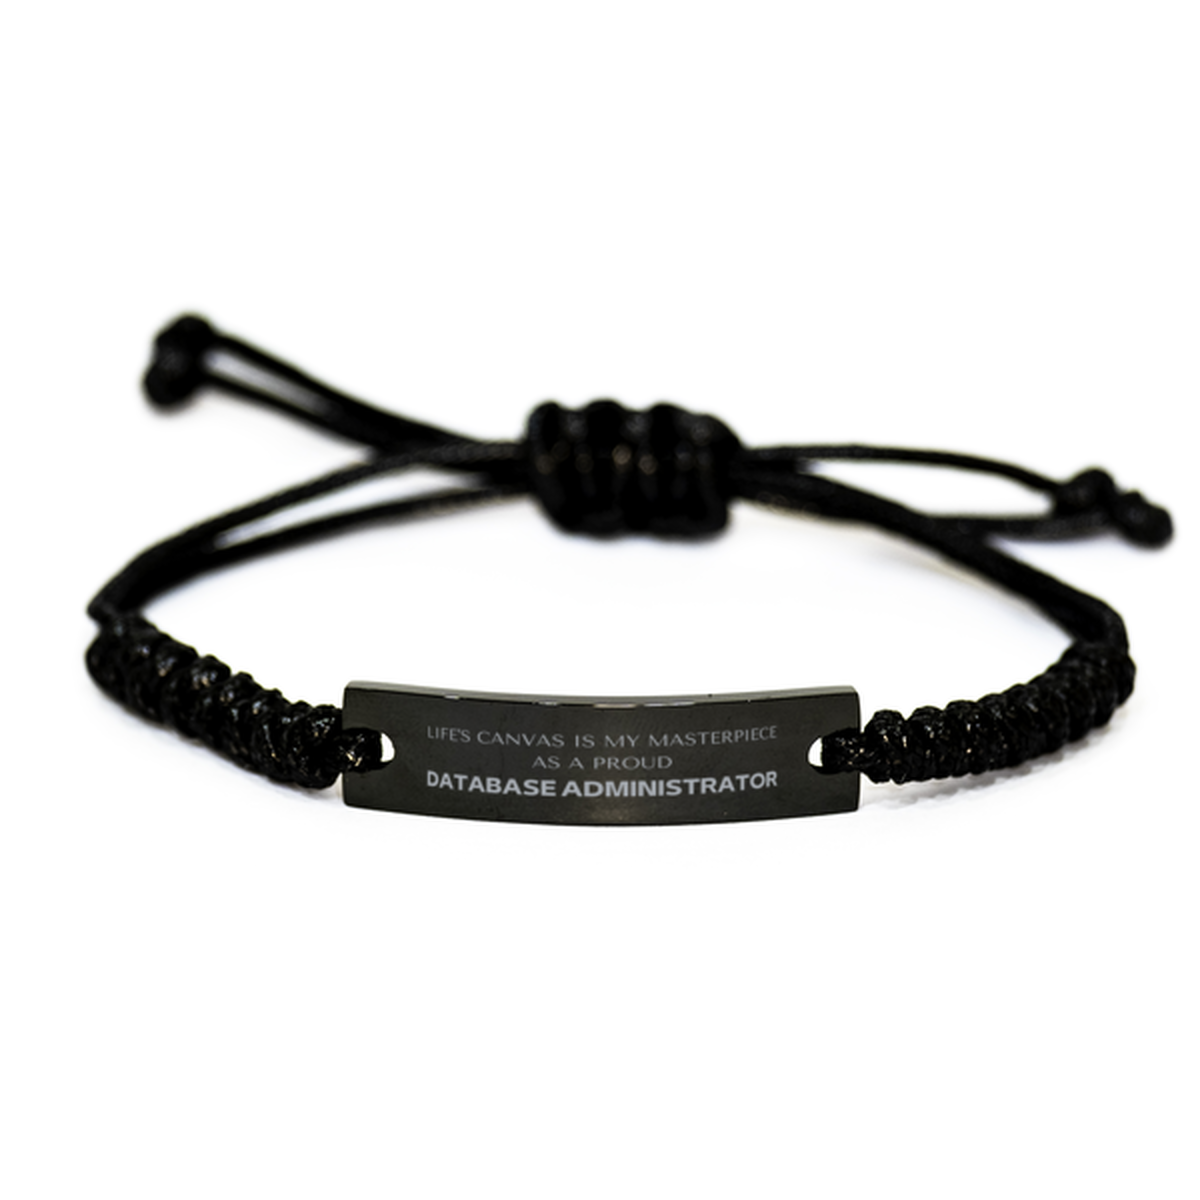 Proud Database Administrator Gifts, Life's canvas is my masterpiece, Epic Birthday Christmas Unique Black Rope Bracelet For Database Administrator, Coworkers, Men, Women, Friends